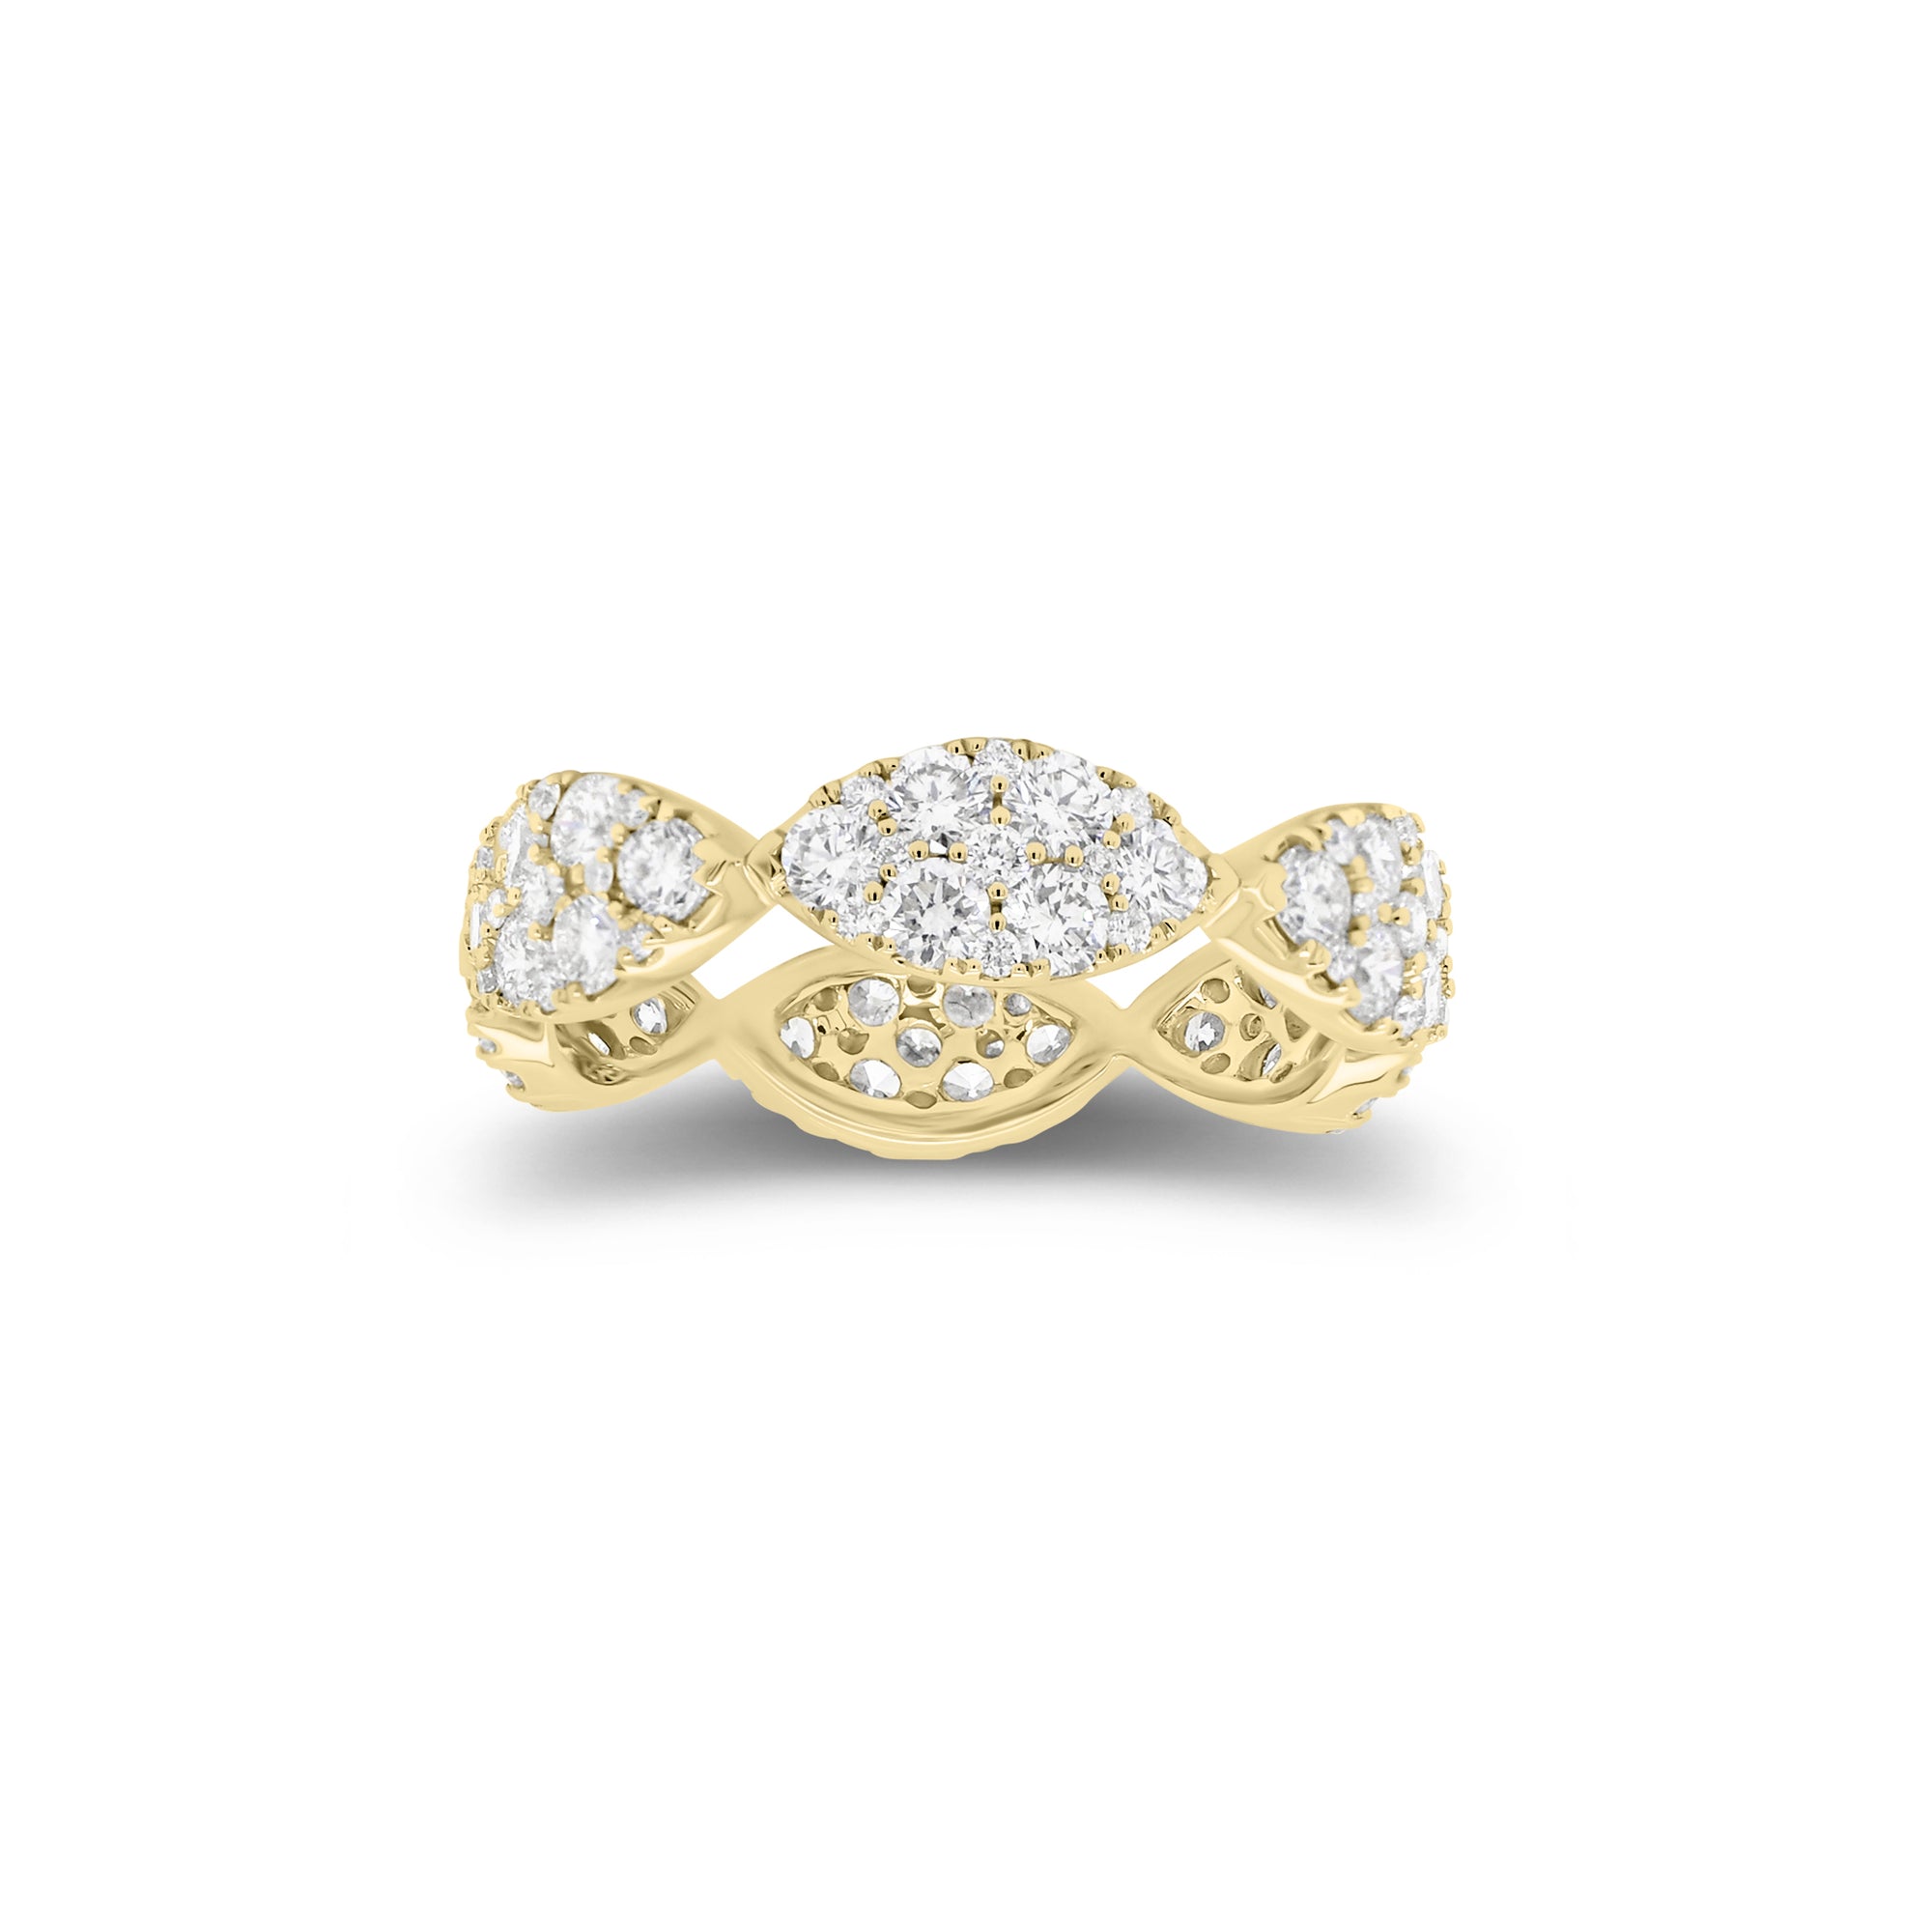 Pave diamond marquises eternity ring - 18K gold weighing 2.76 grams - 90 round diamonds weighing 1.84 carats